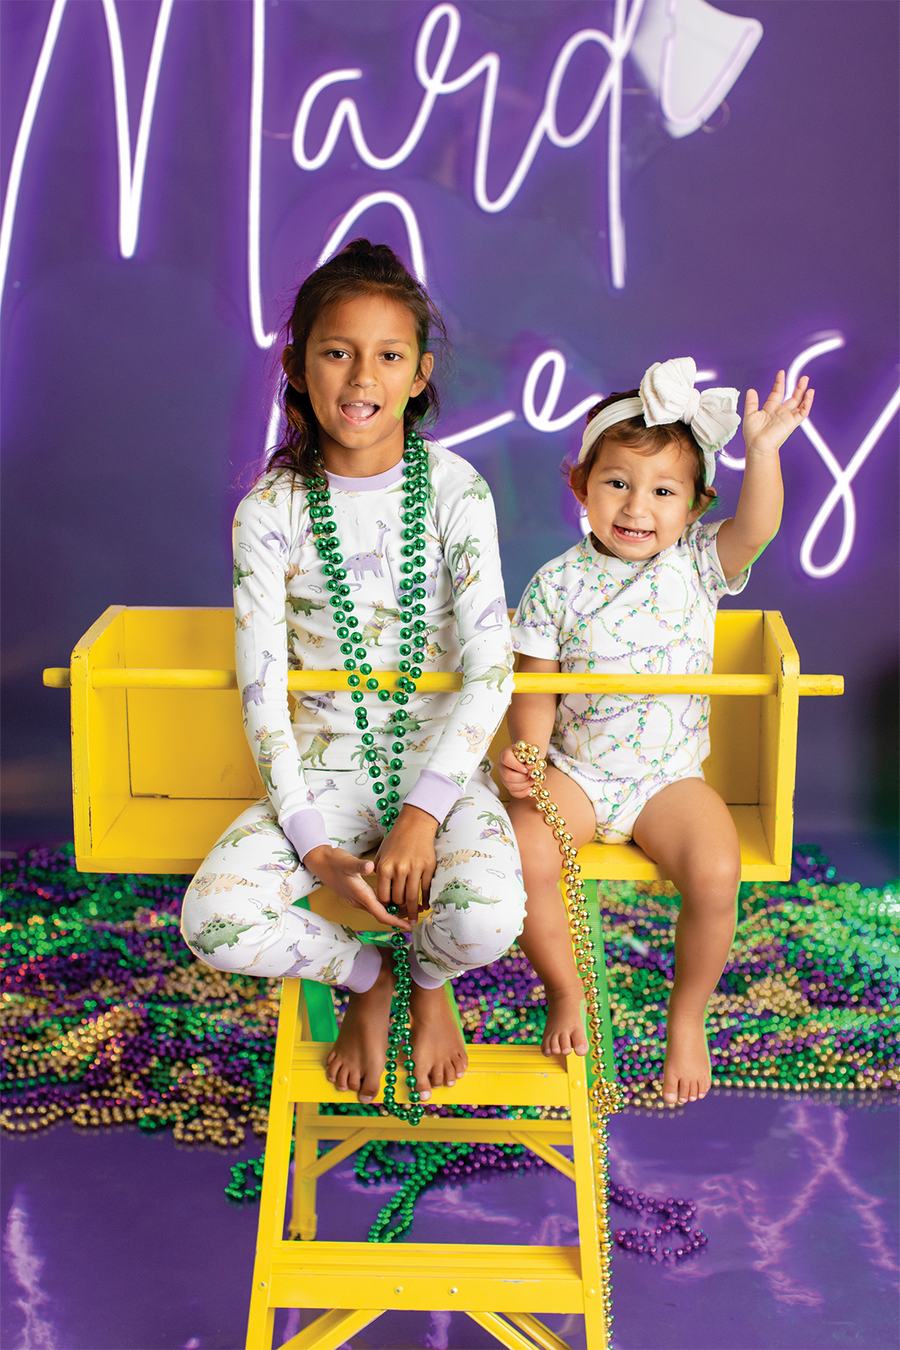 just-here-for-the-beads-mardi-gras-onesies